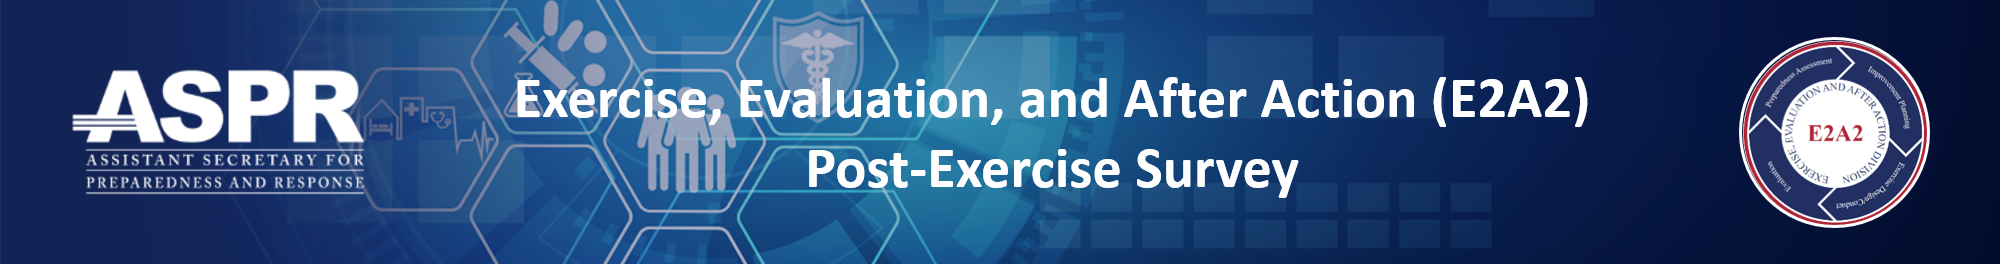 Division of Exercises, Evaluations, and After Actions (EEAA) Post-Exercise Survey